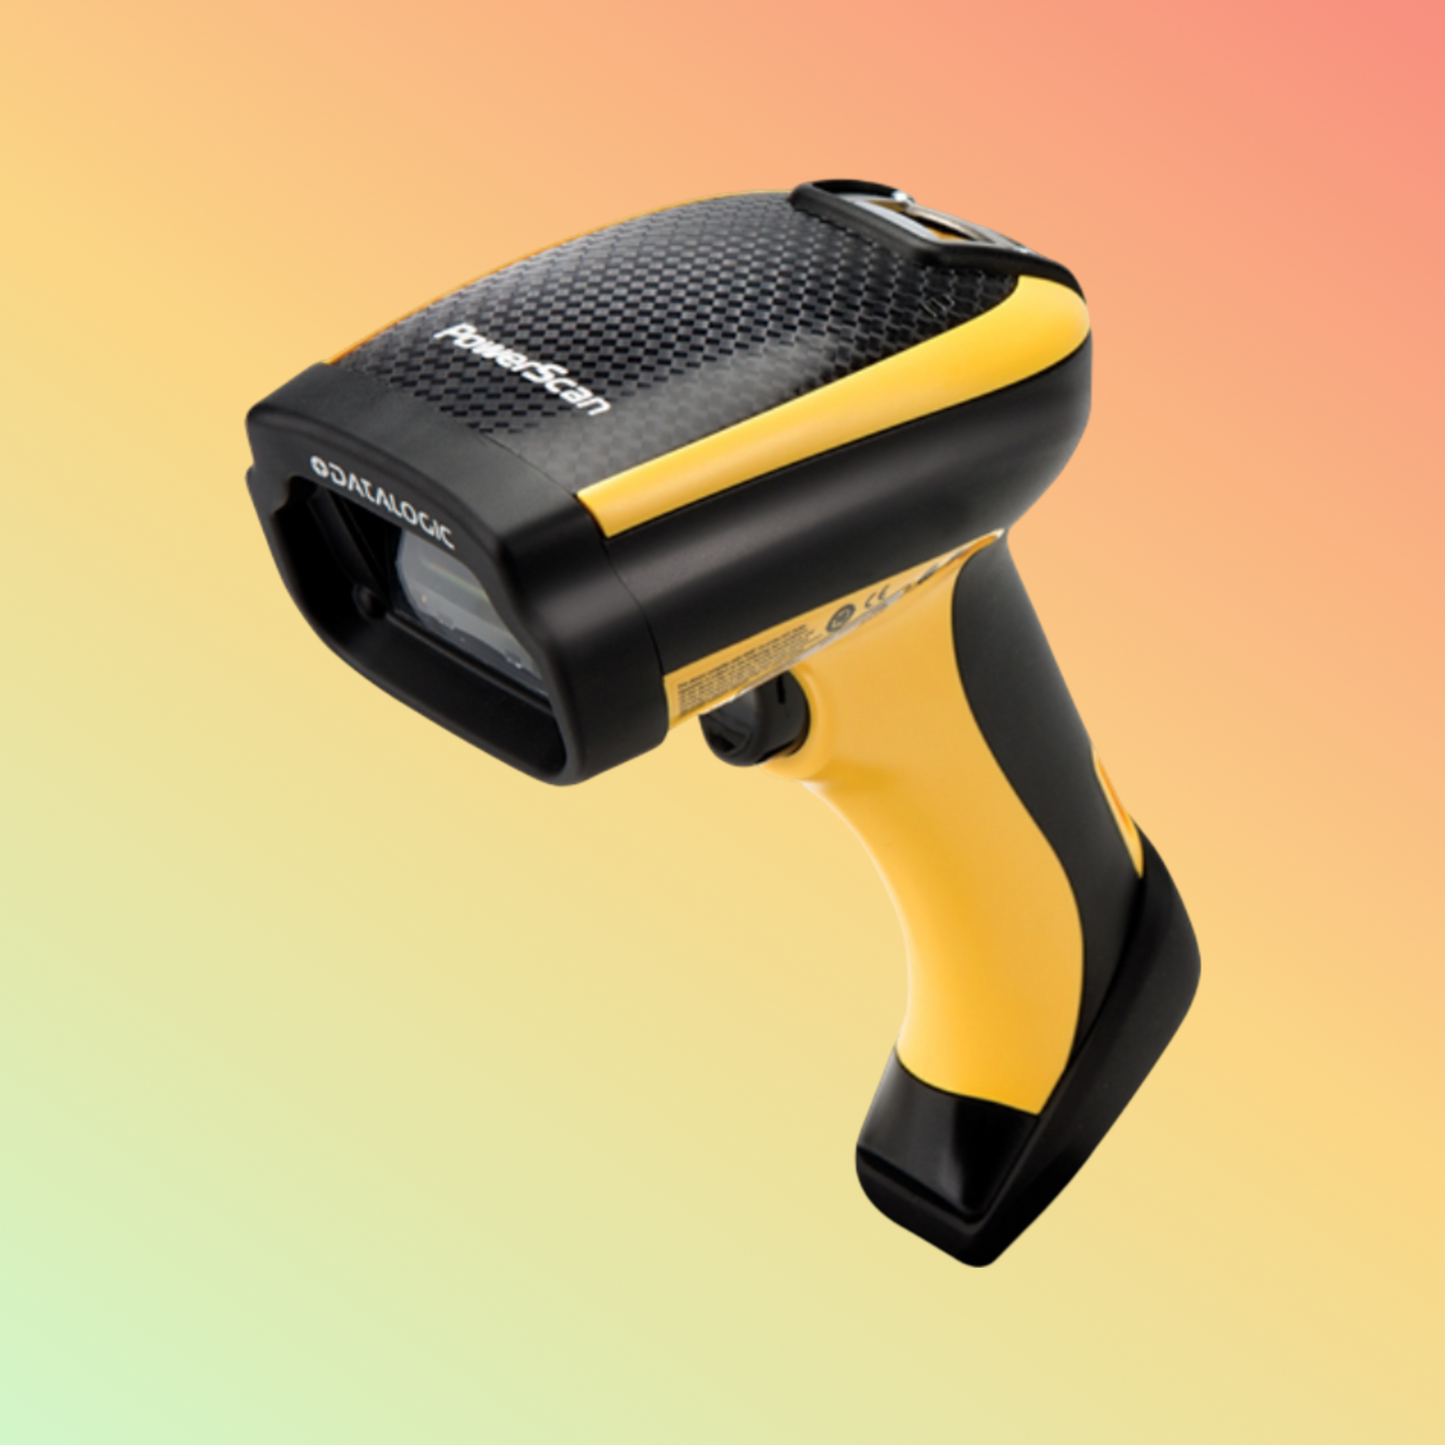 alt="Handheld DCI PD9500 2D DPM Scanner, precise and reliable"